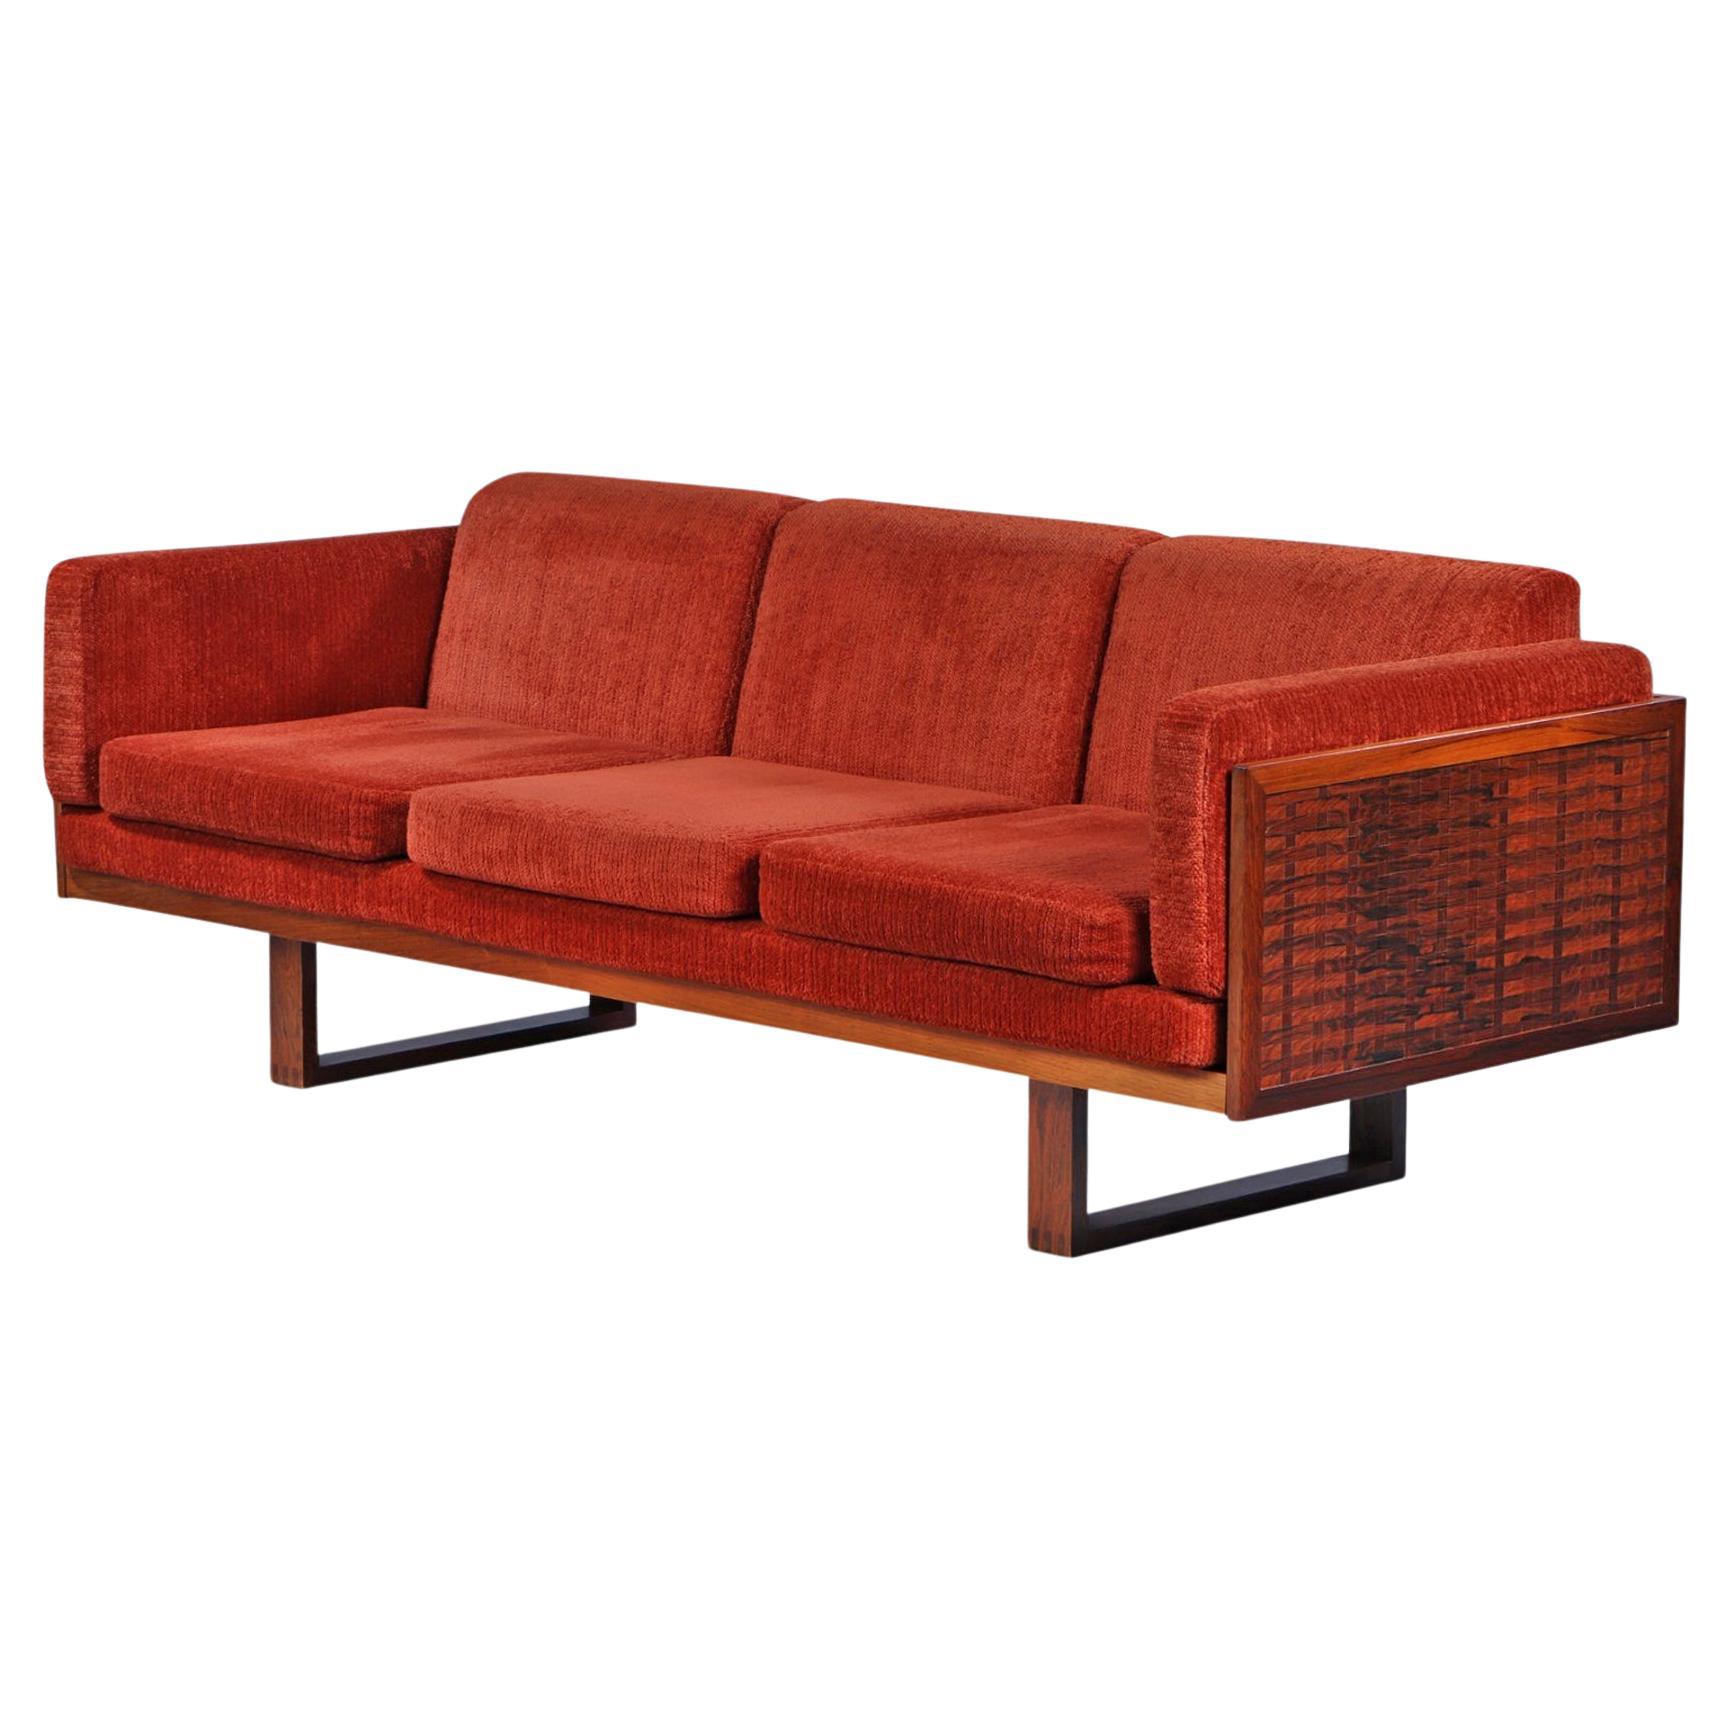 Basketweave "Guvenør" Sofa in Rosewood by Poul Cadovius For Sale